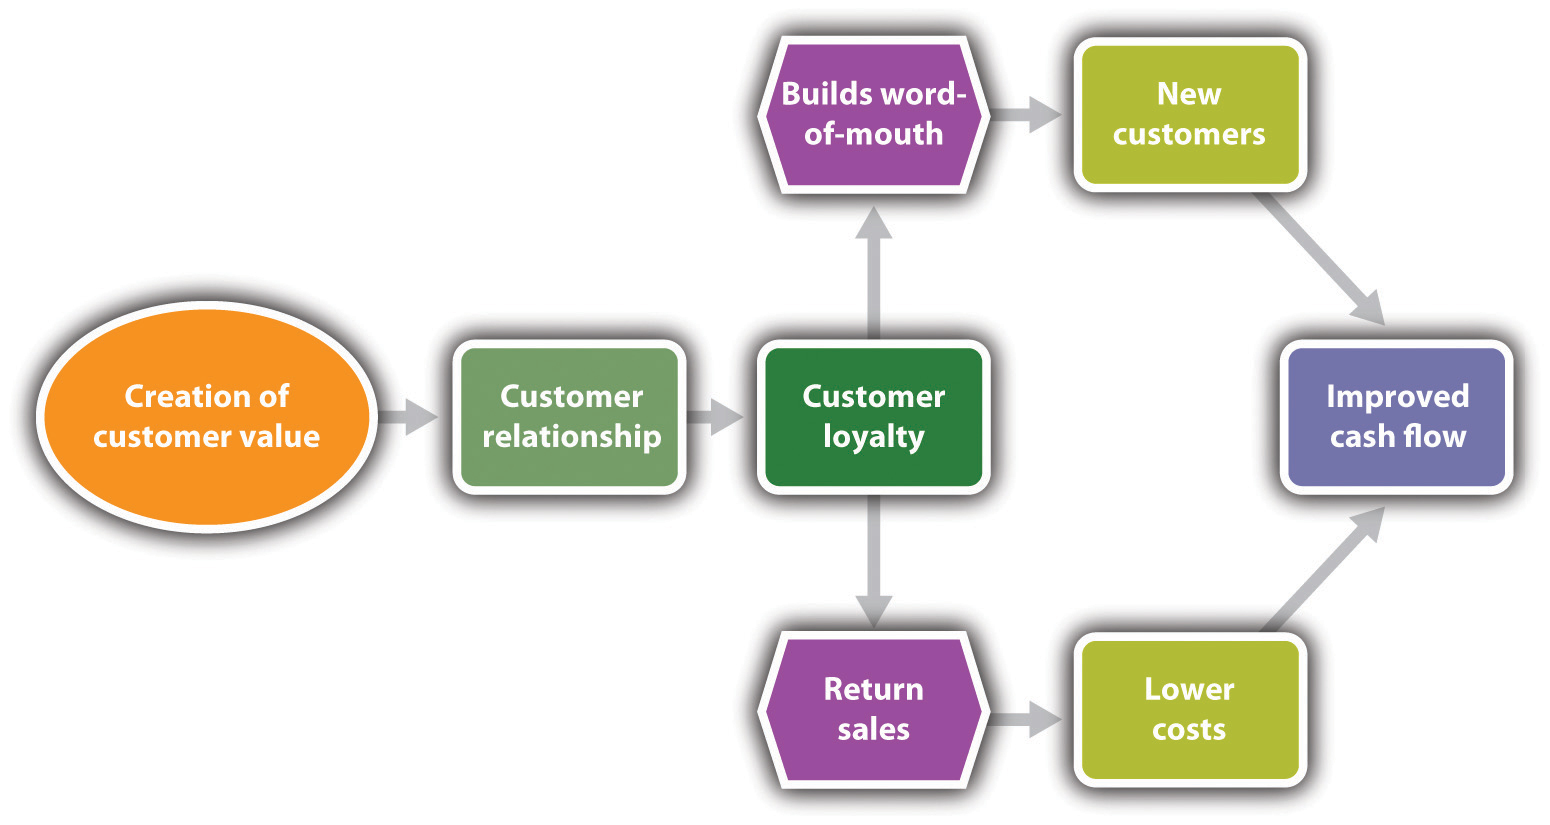 Create customer value to build customer realationships and loyalty. Customer loyalty leads to return sales lower costs and improved cash flow. It also builds word of mouth producing new customers and again, improved cash flow